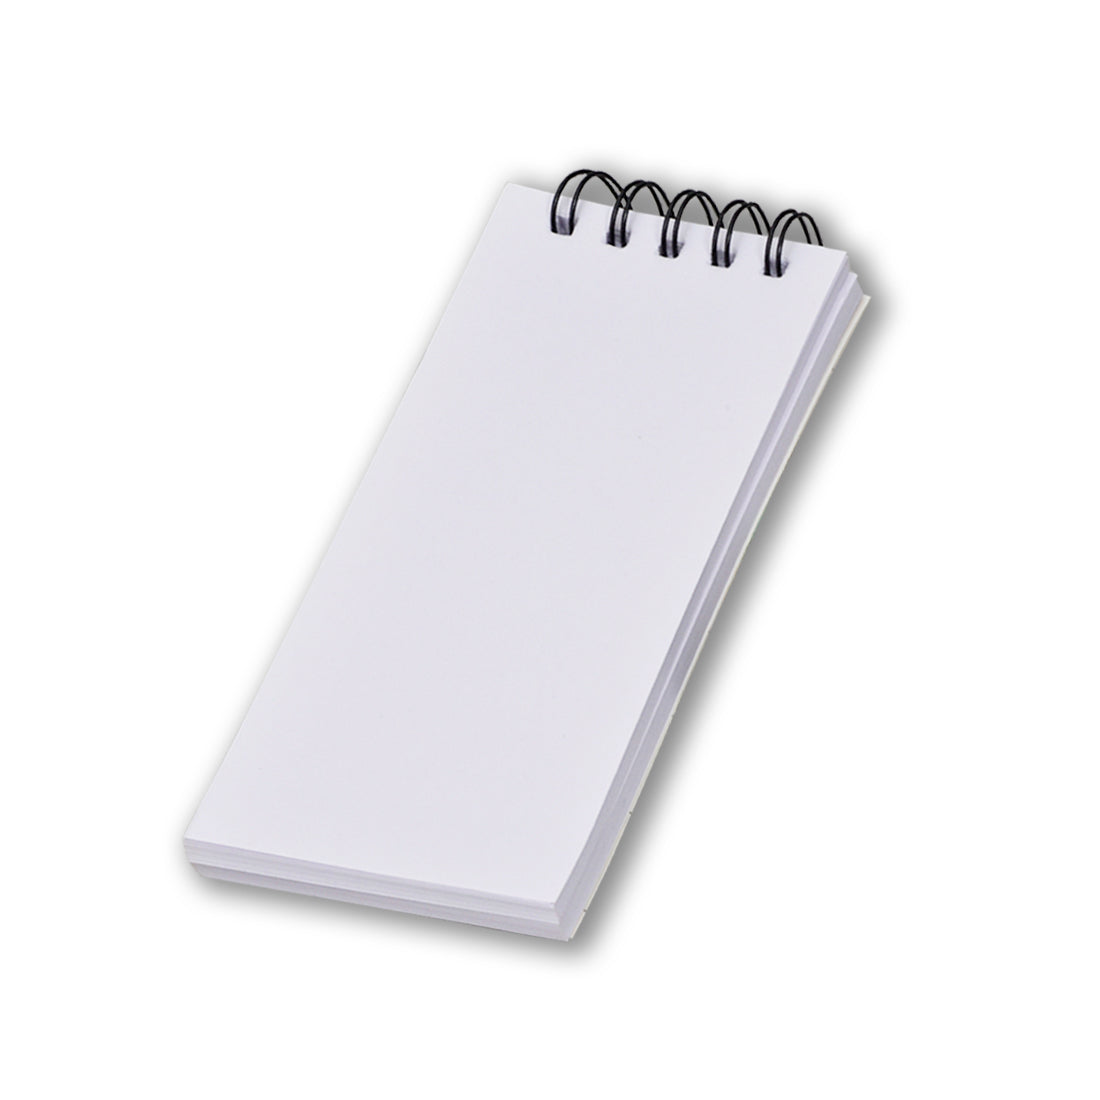 Realistic to do list spiral notebook white notepad